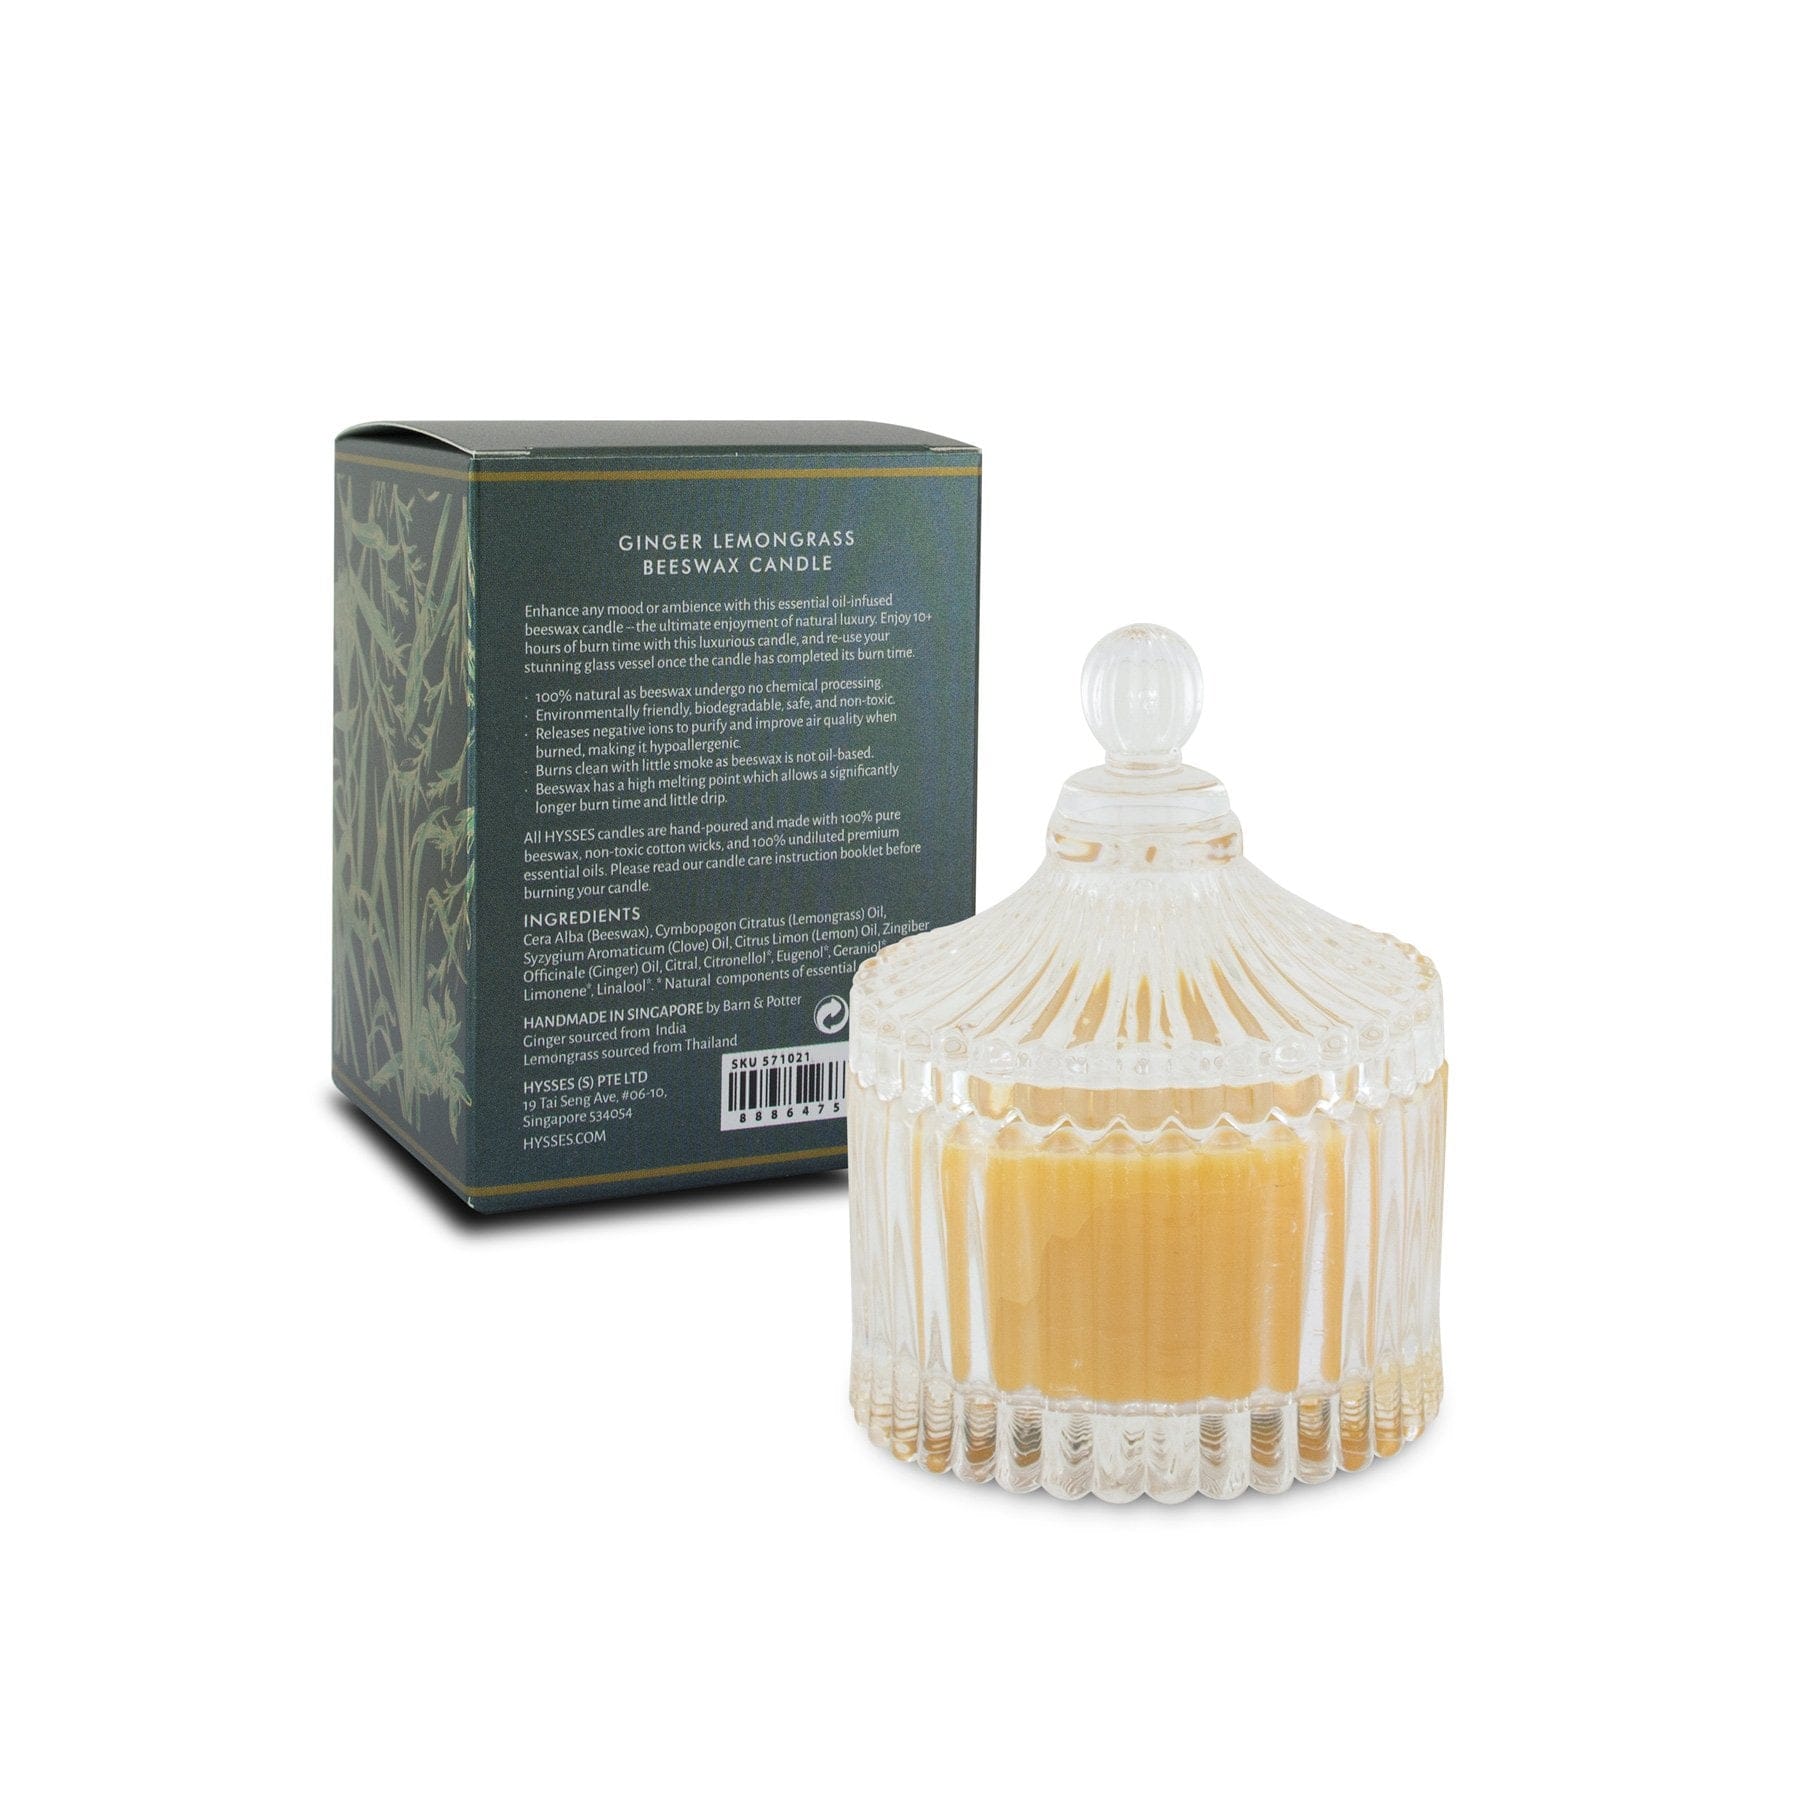 Hysses Home Scents 650g Beeswax Candle Ginger Lemongrass, 650g